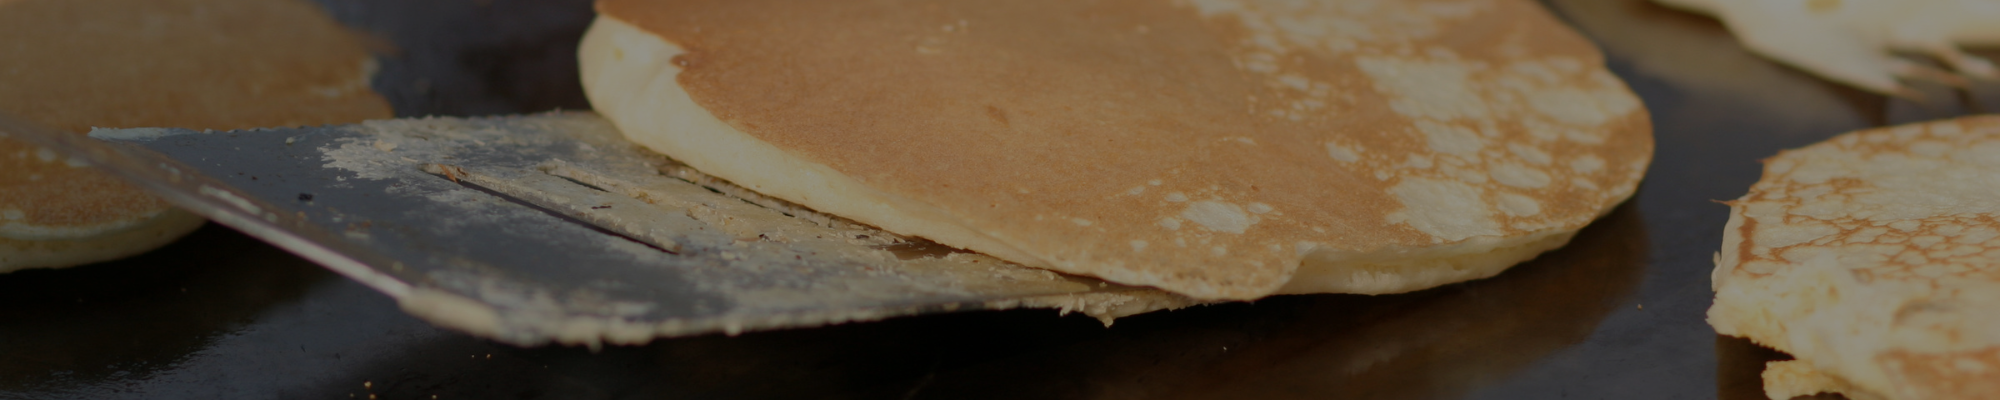 Image of a pancake being flipped on a griddle